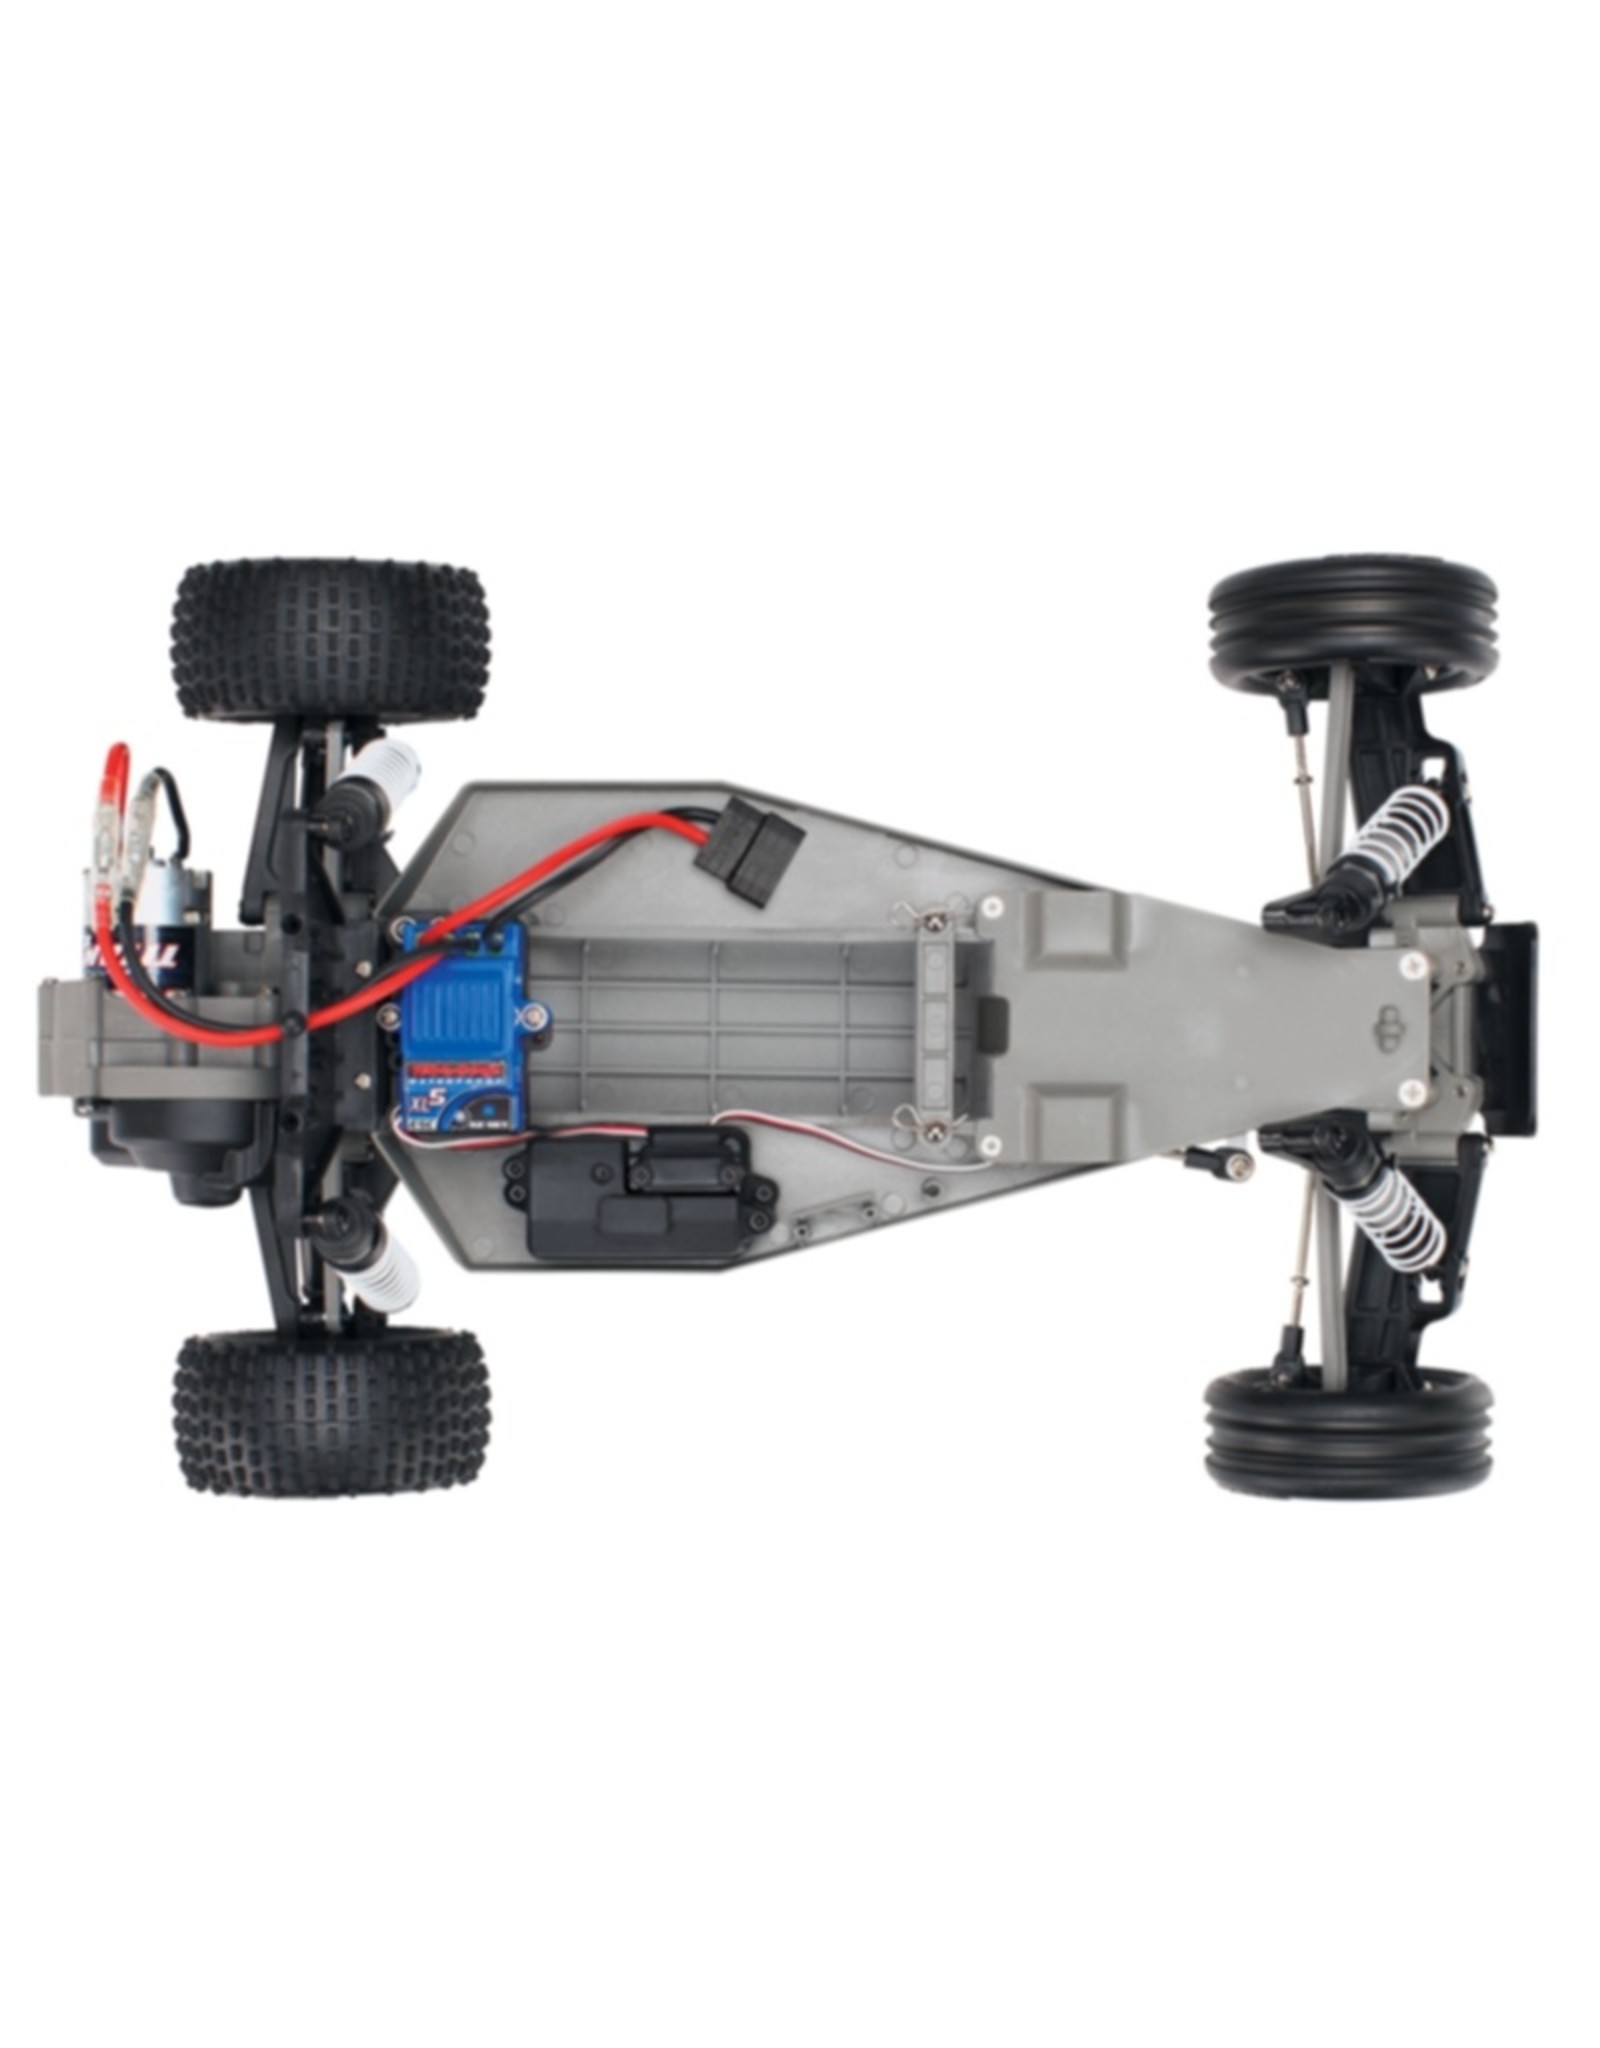 Bandit®: 1/10 Scale Off-Road Buggy with TQ™ 2.4GHz radio system